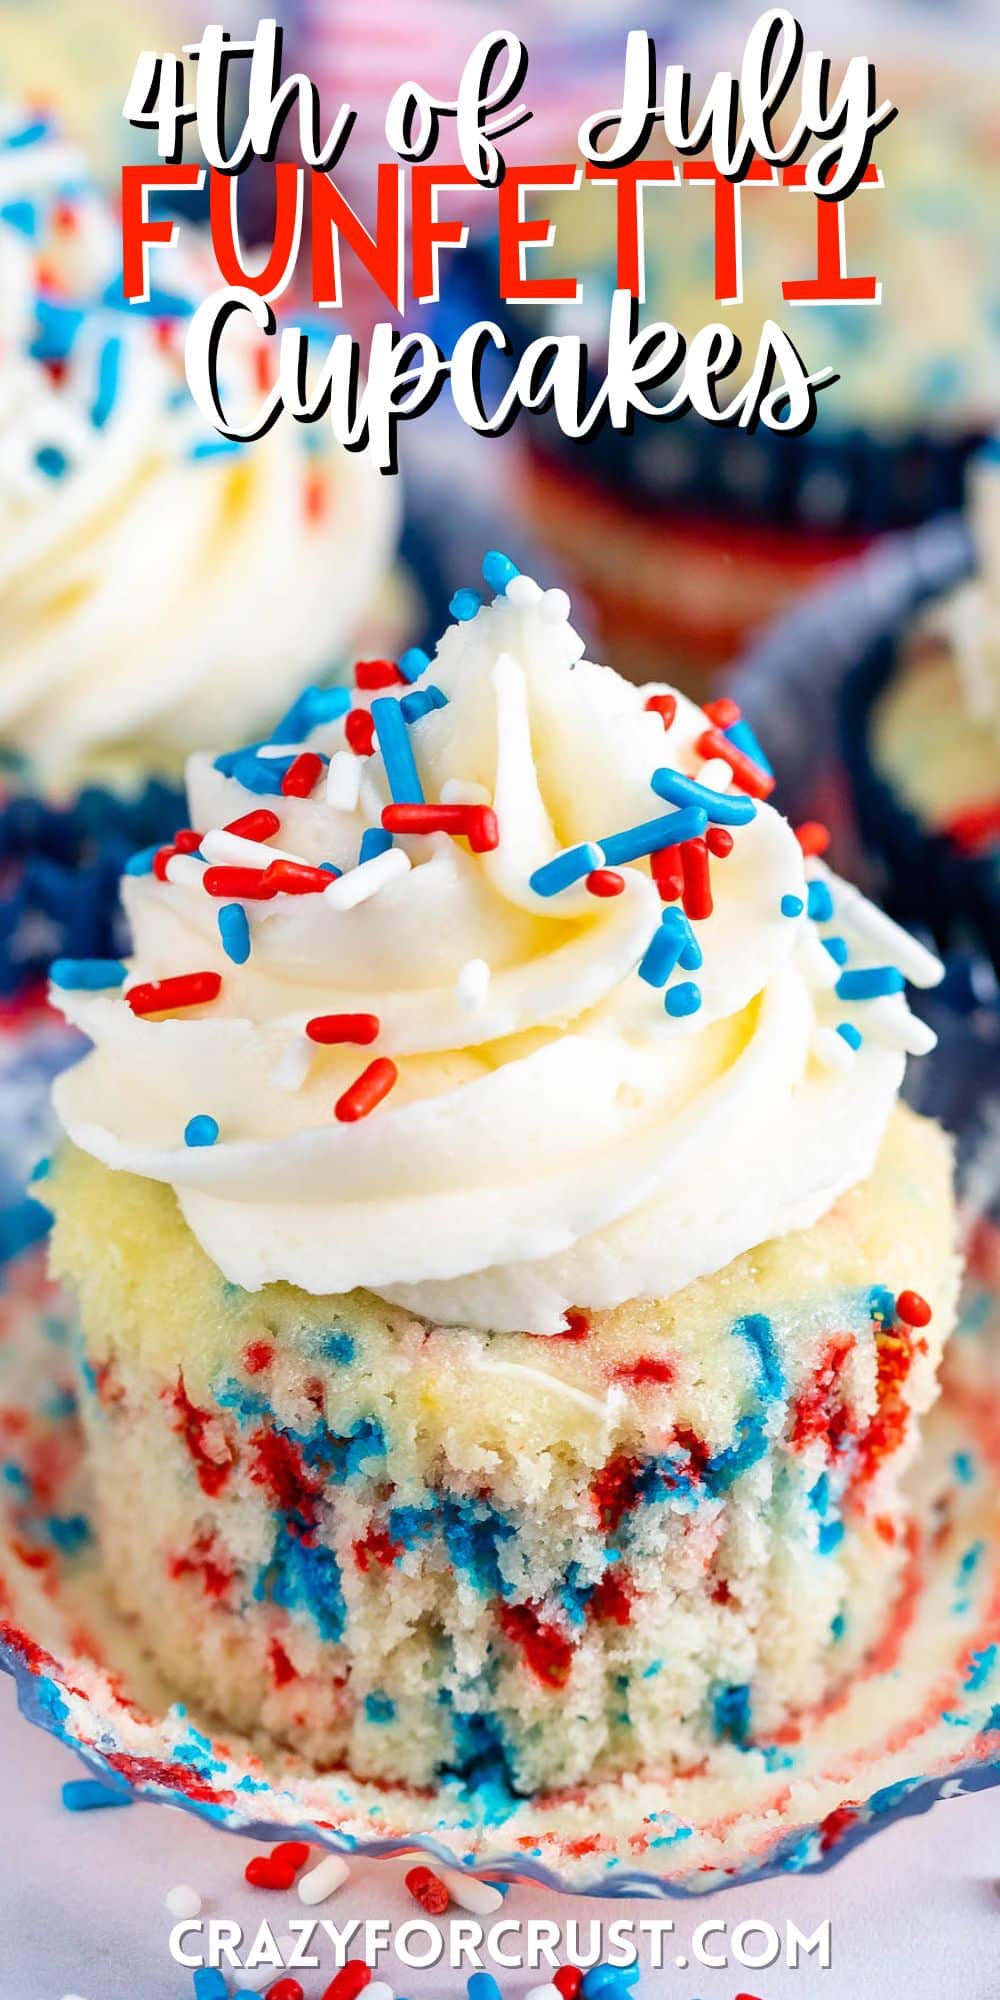 cupcakes with vanilla frosting and with red white and blue sprinkles on top with words on the image.